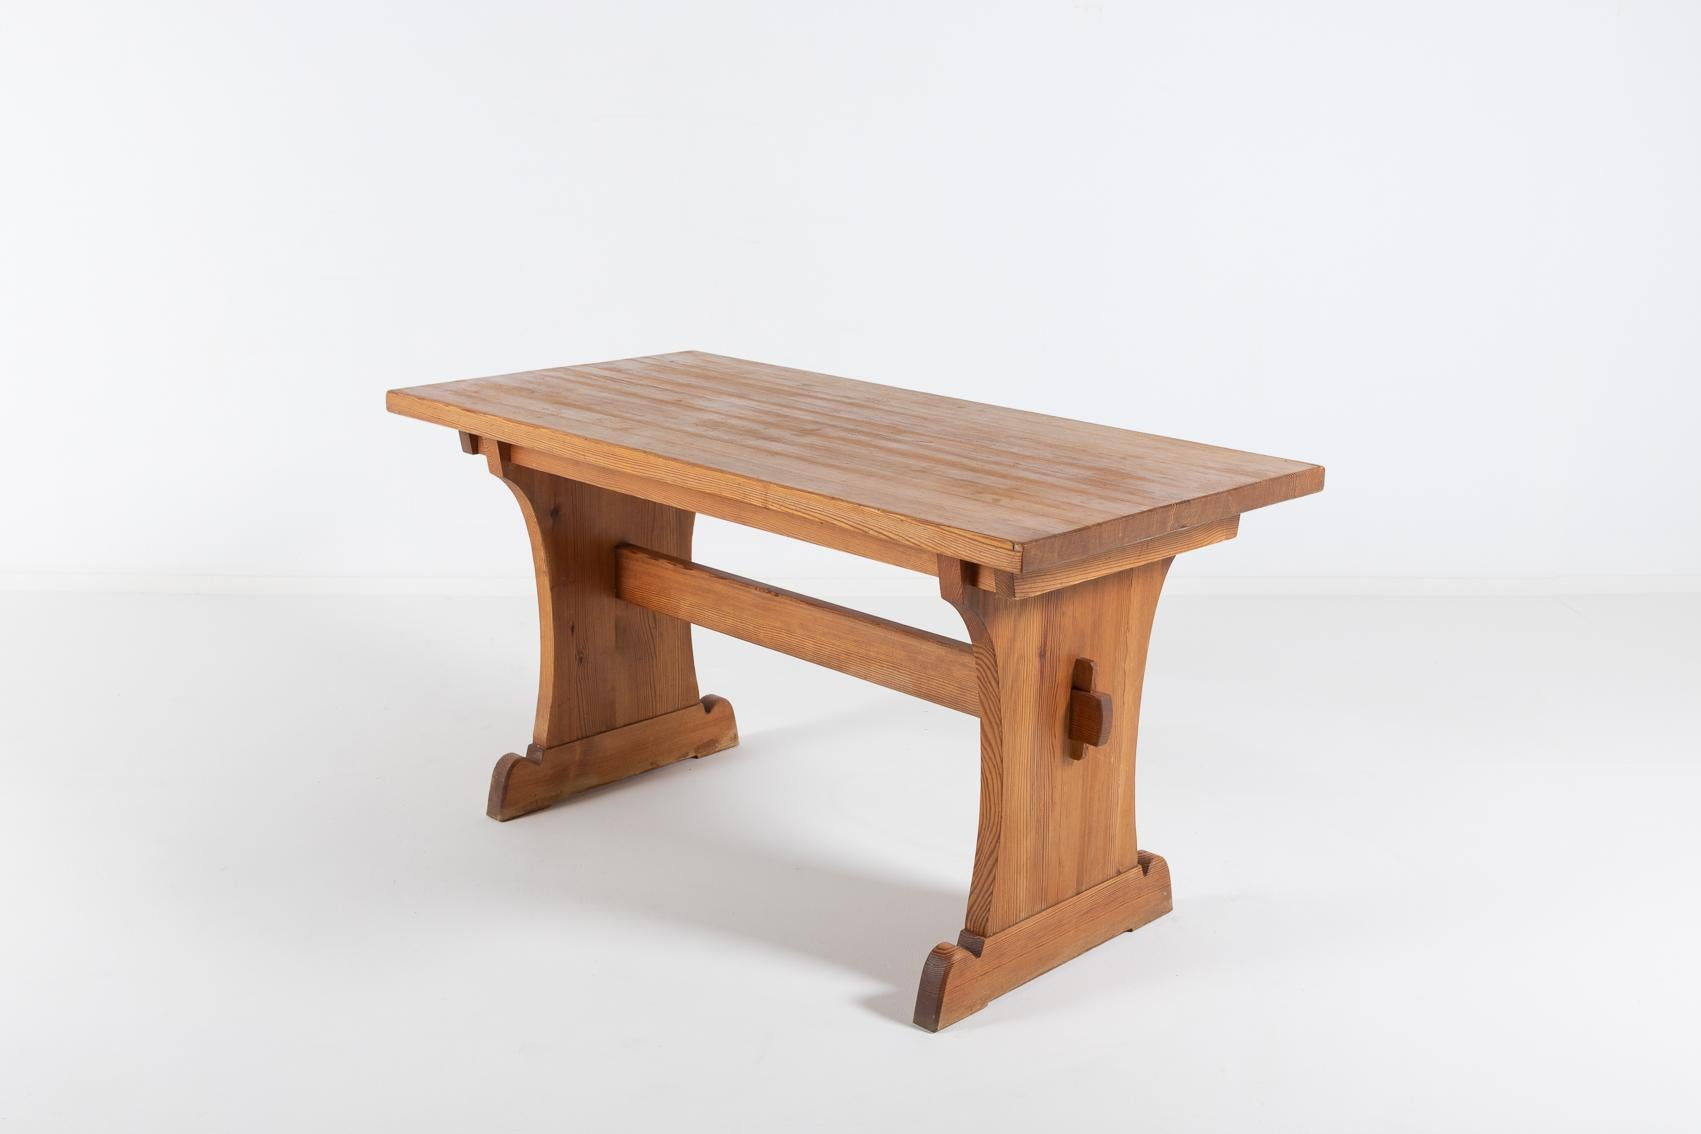 Scandinavian Modern solid pine table from Swedish icon Axel Einar Hjorth for Nordiska Kompaniet, 1930s.

Condition
Good, age related wear and marks, original patina

Dimensions
height: 74 cm
length: 140 cm
width: 69 cm